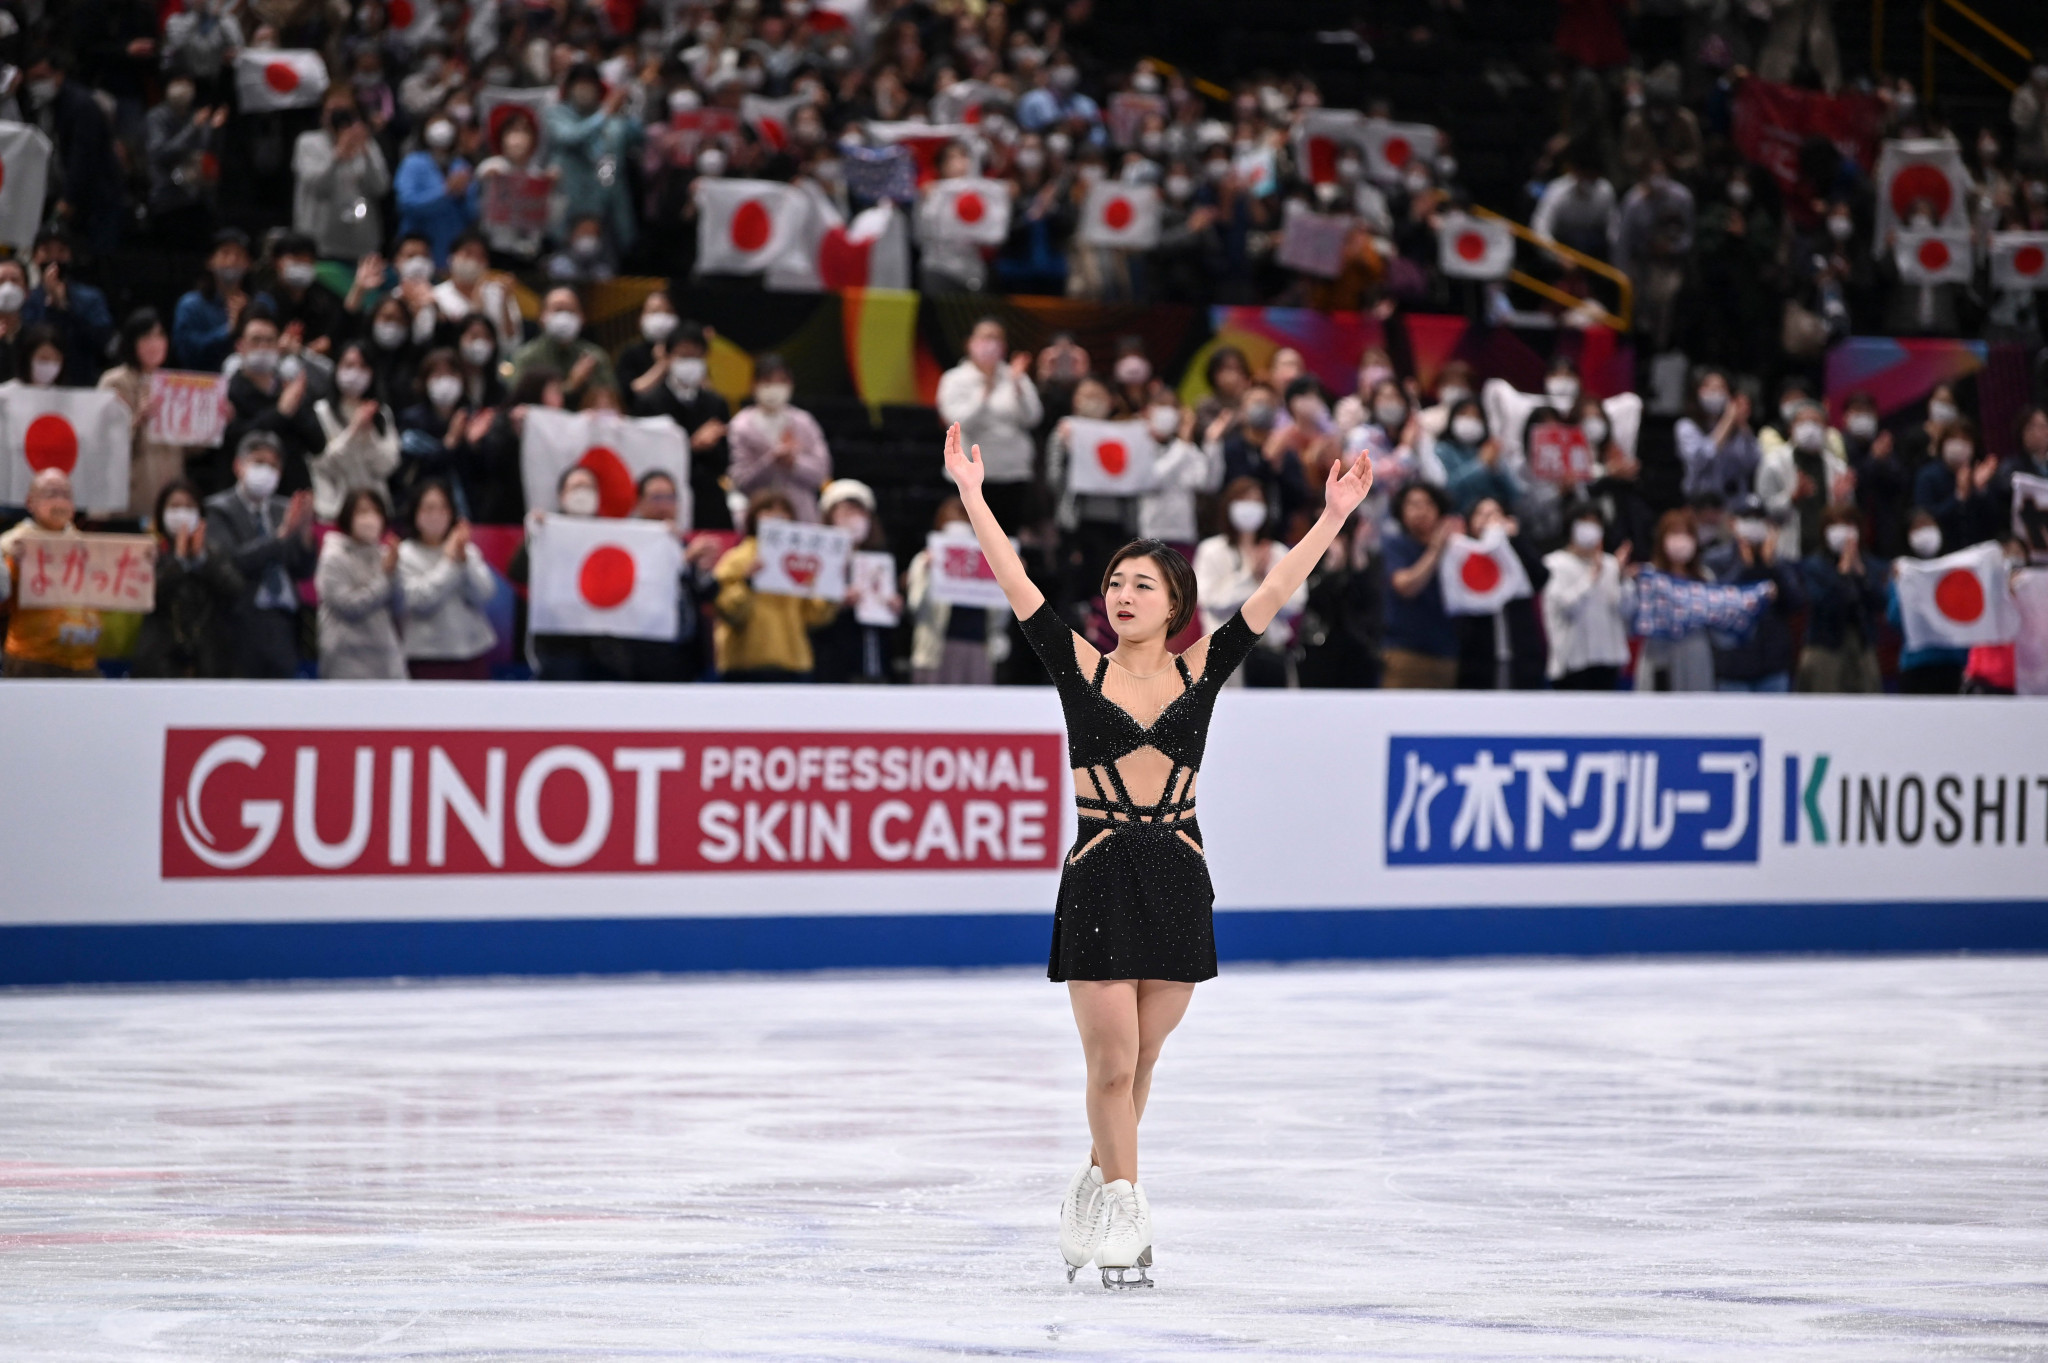 Japan's World Champion Kaori Sakamoto has a substantial lead after the short programme at the World Championships in Saitama ©Getty Images